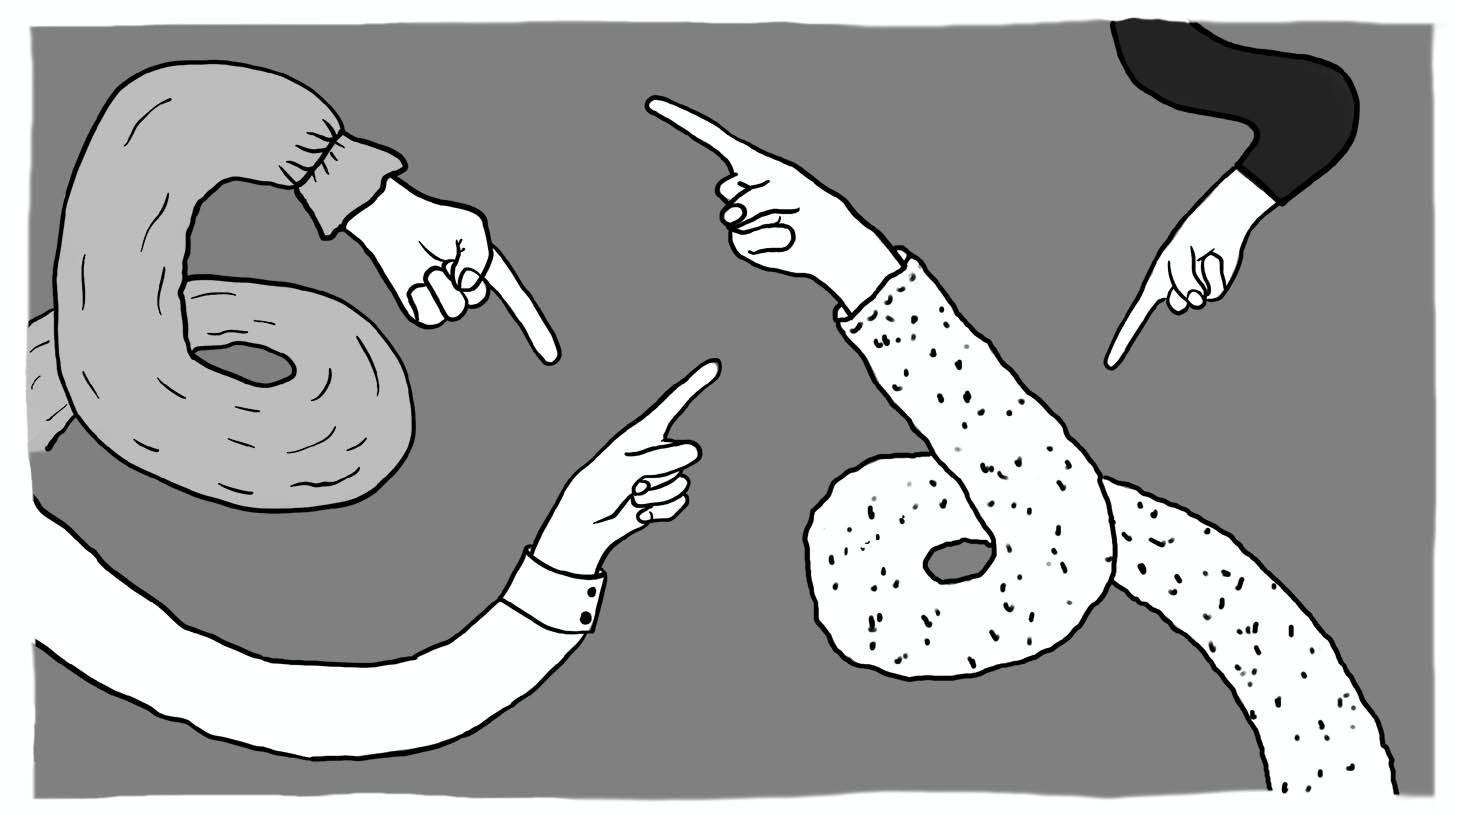 Cartoon-ish fingers point in circles at each other